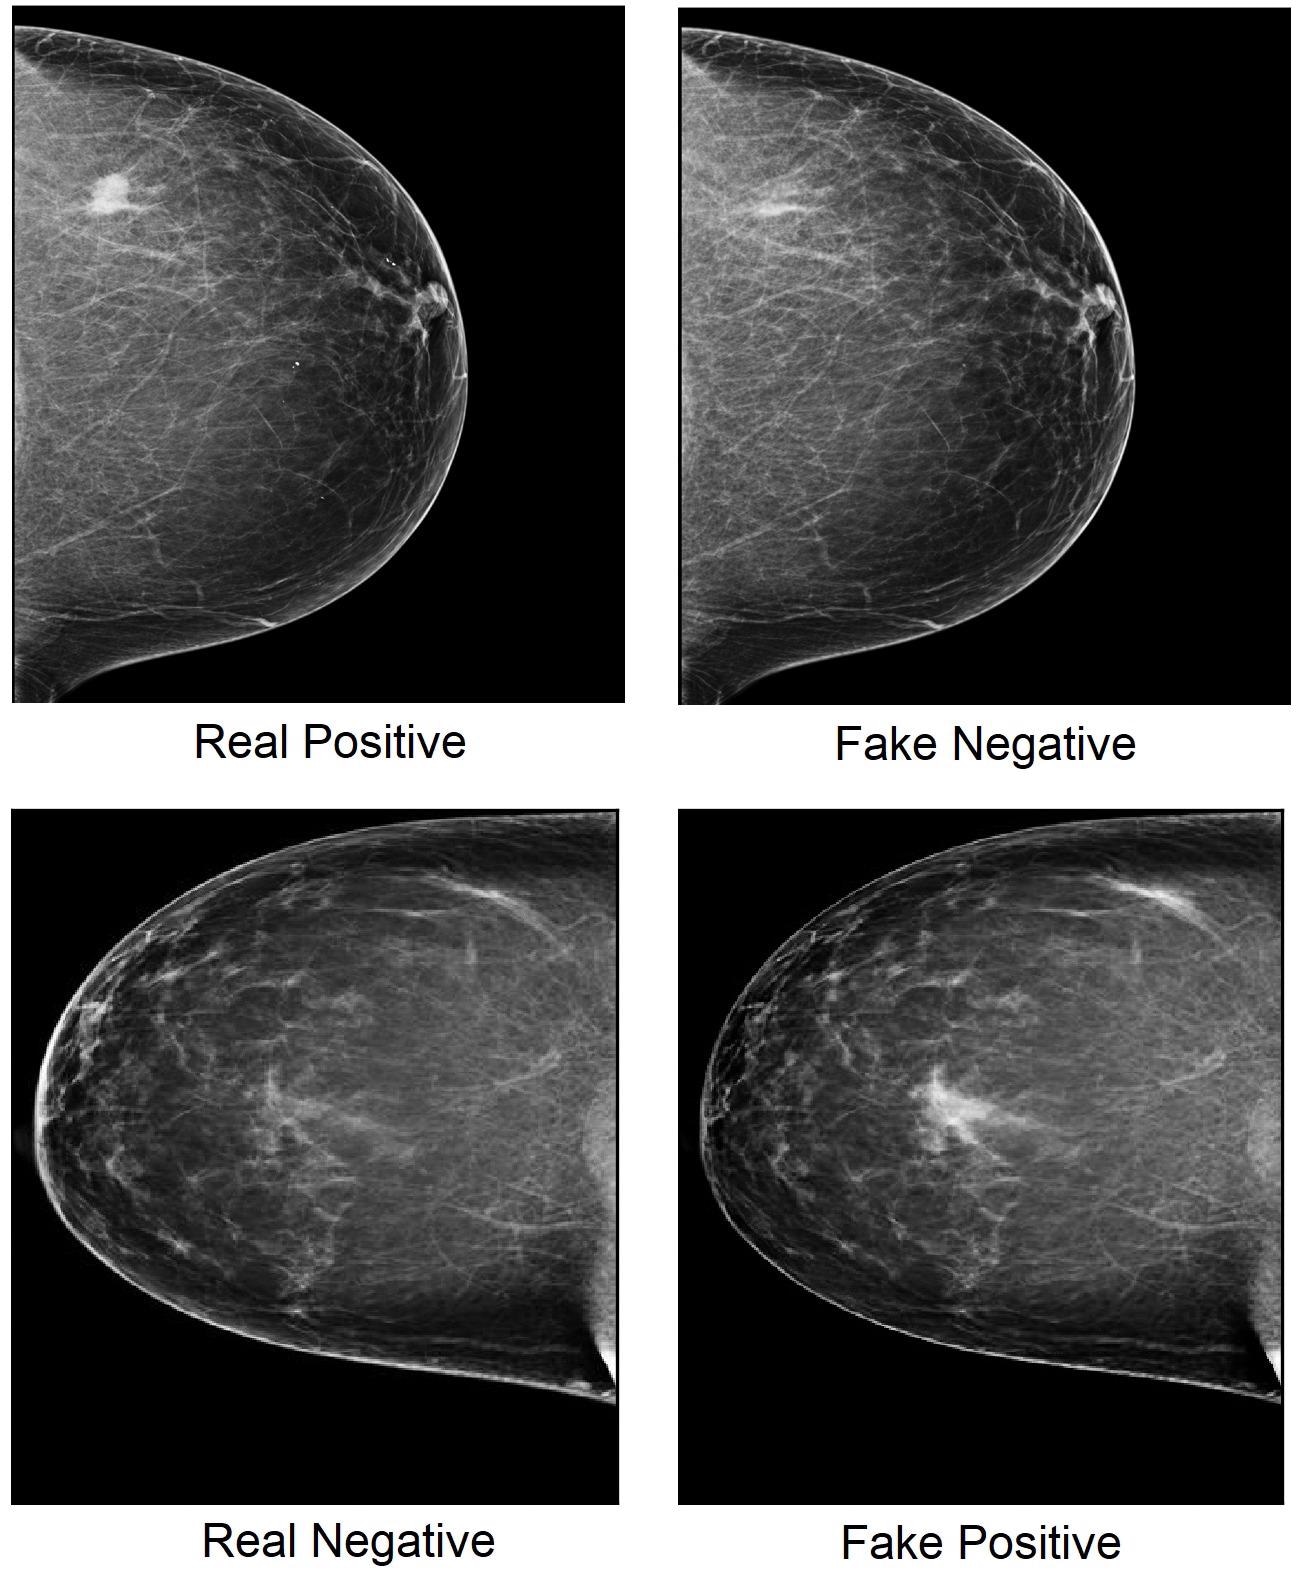 Image-Tampering Attacks can Deceive AI-Cancer-Spotting Models and Human Experts.